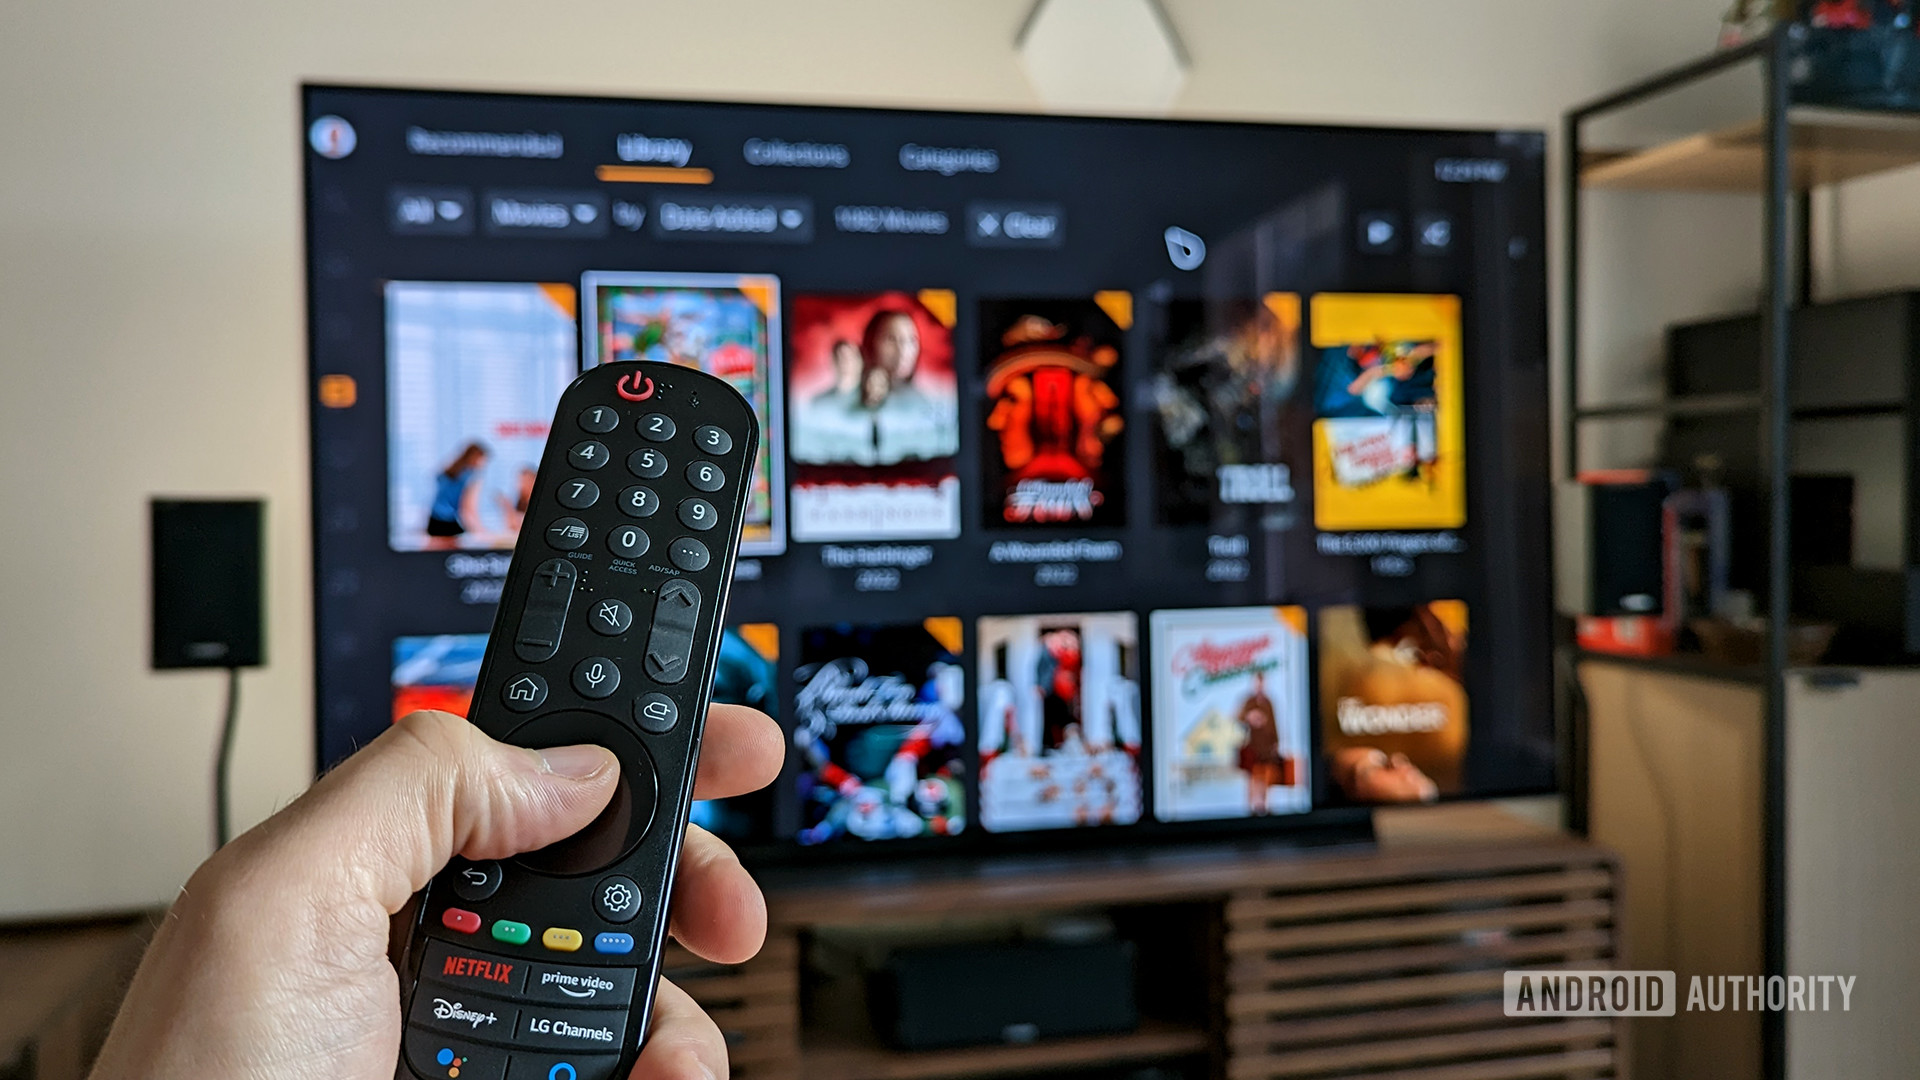 Cable vs streaming: Does traditional TV still have something fresh to offer?